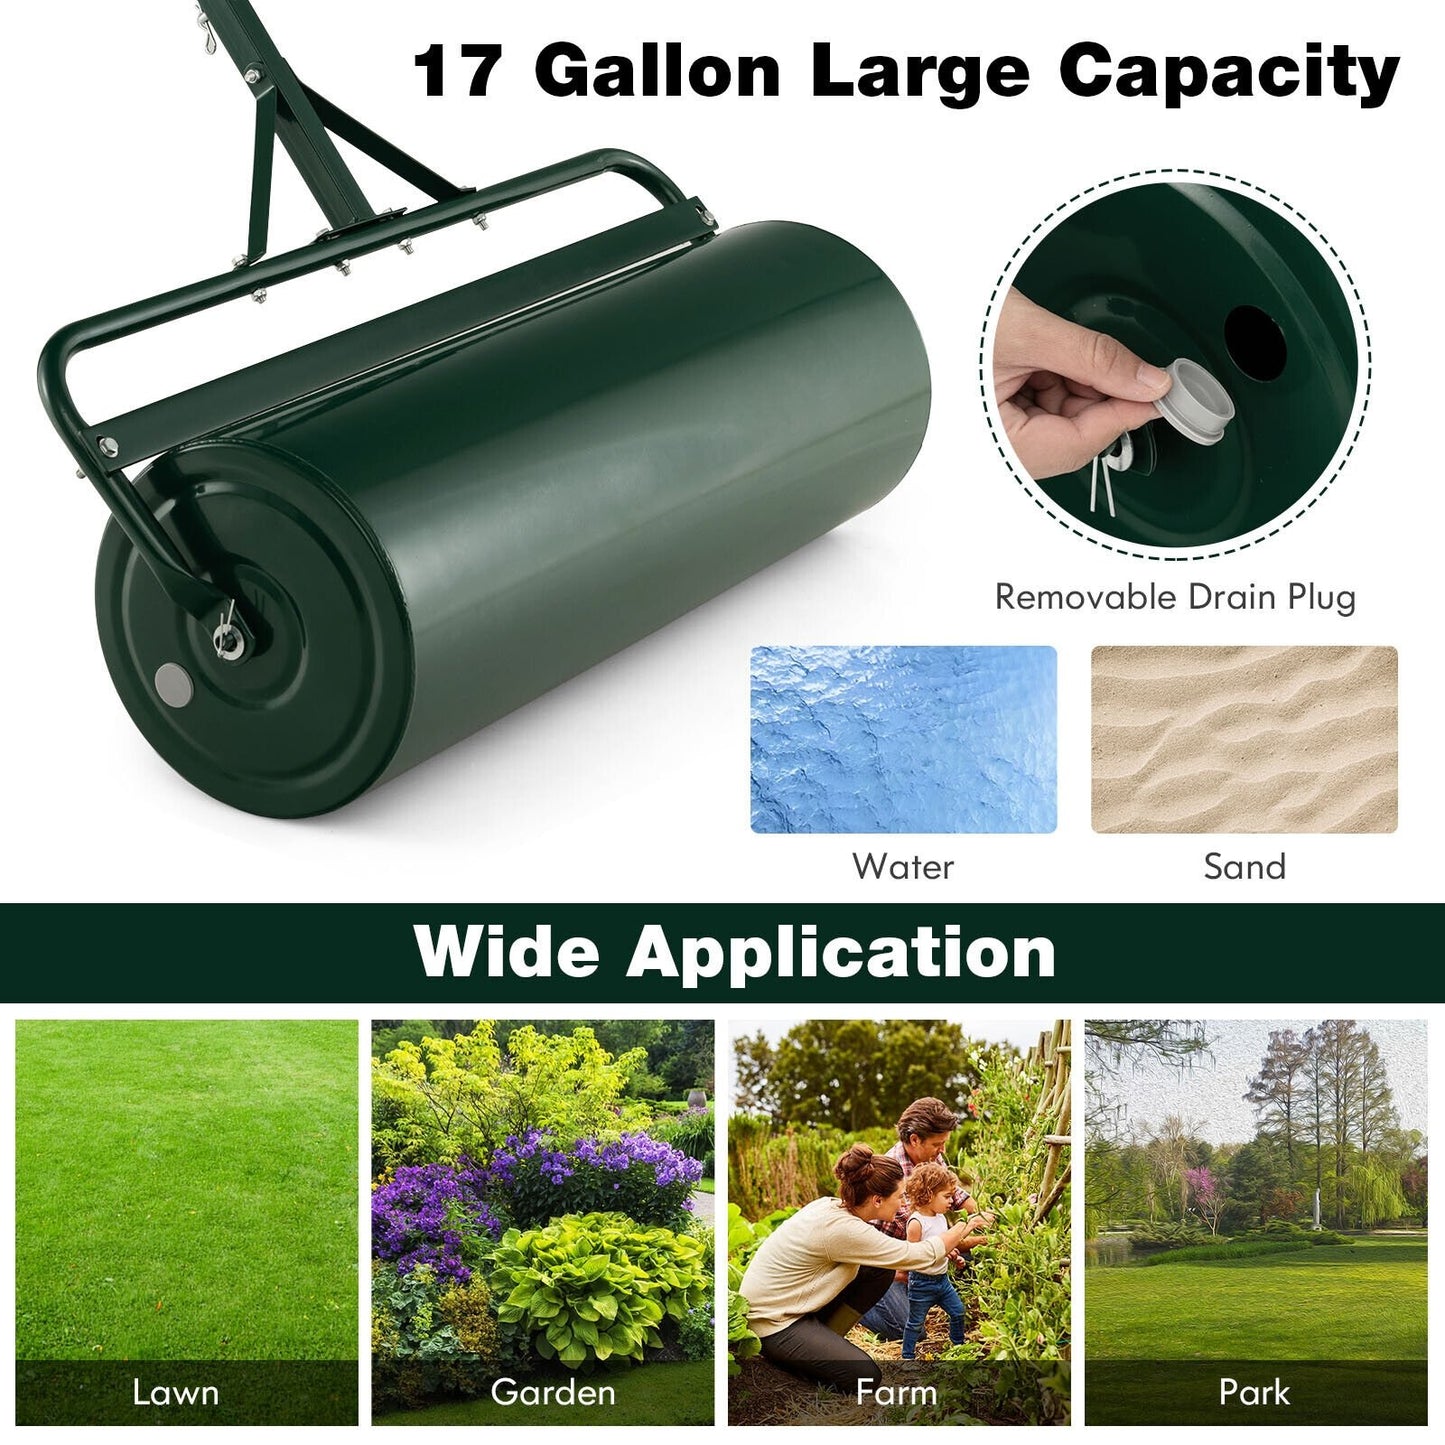 Metal Lawn Roller with Detachable Gripping Handle, Green